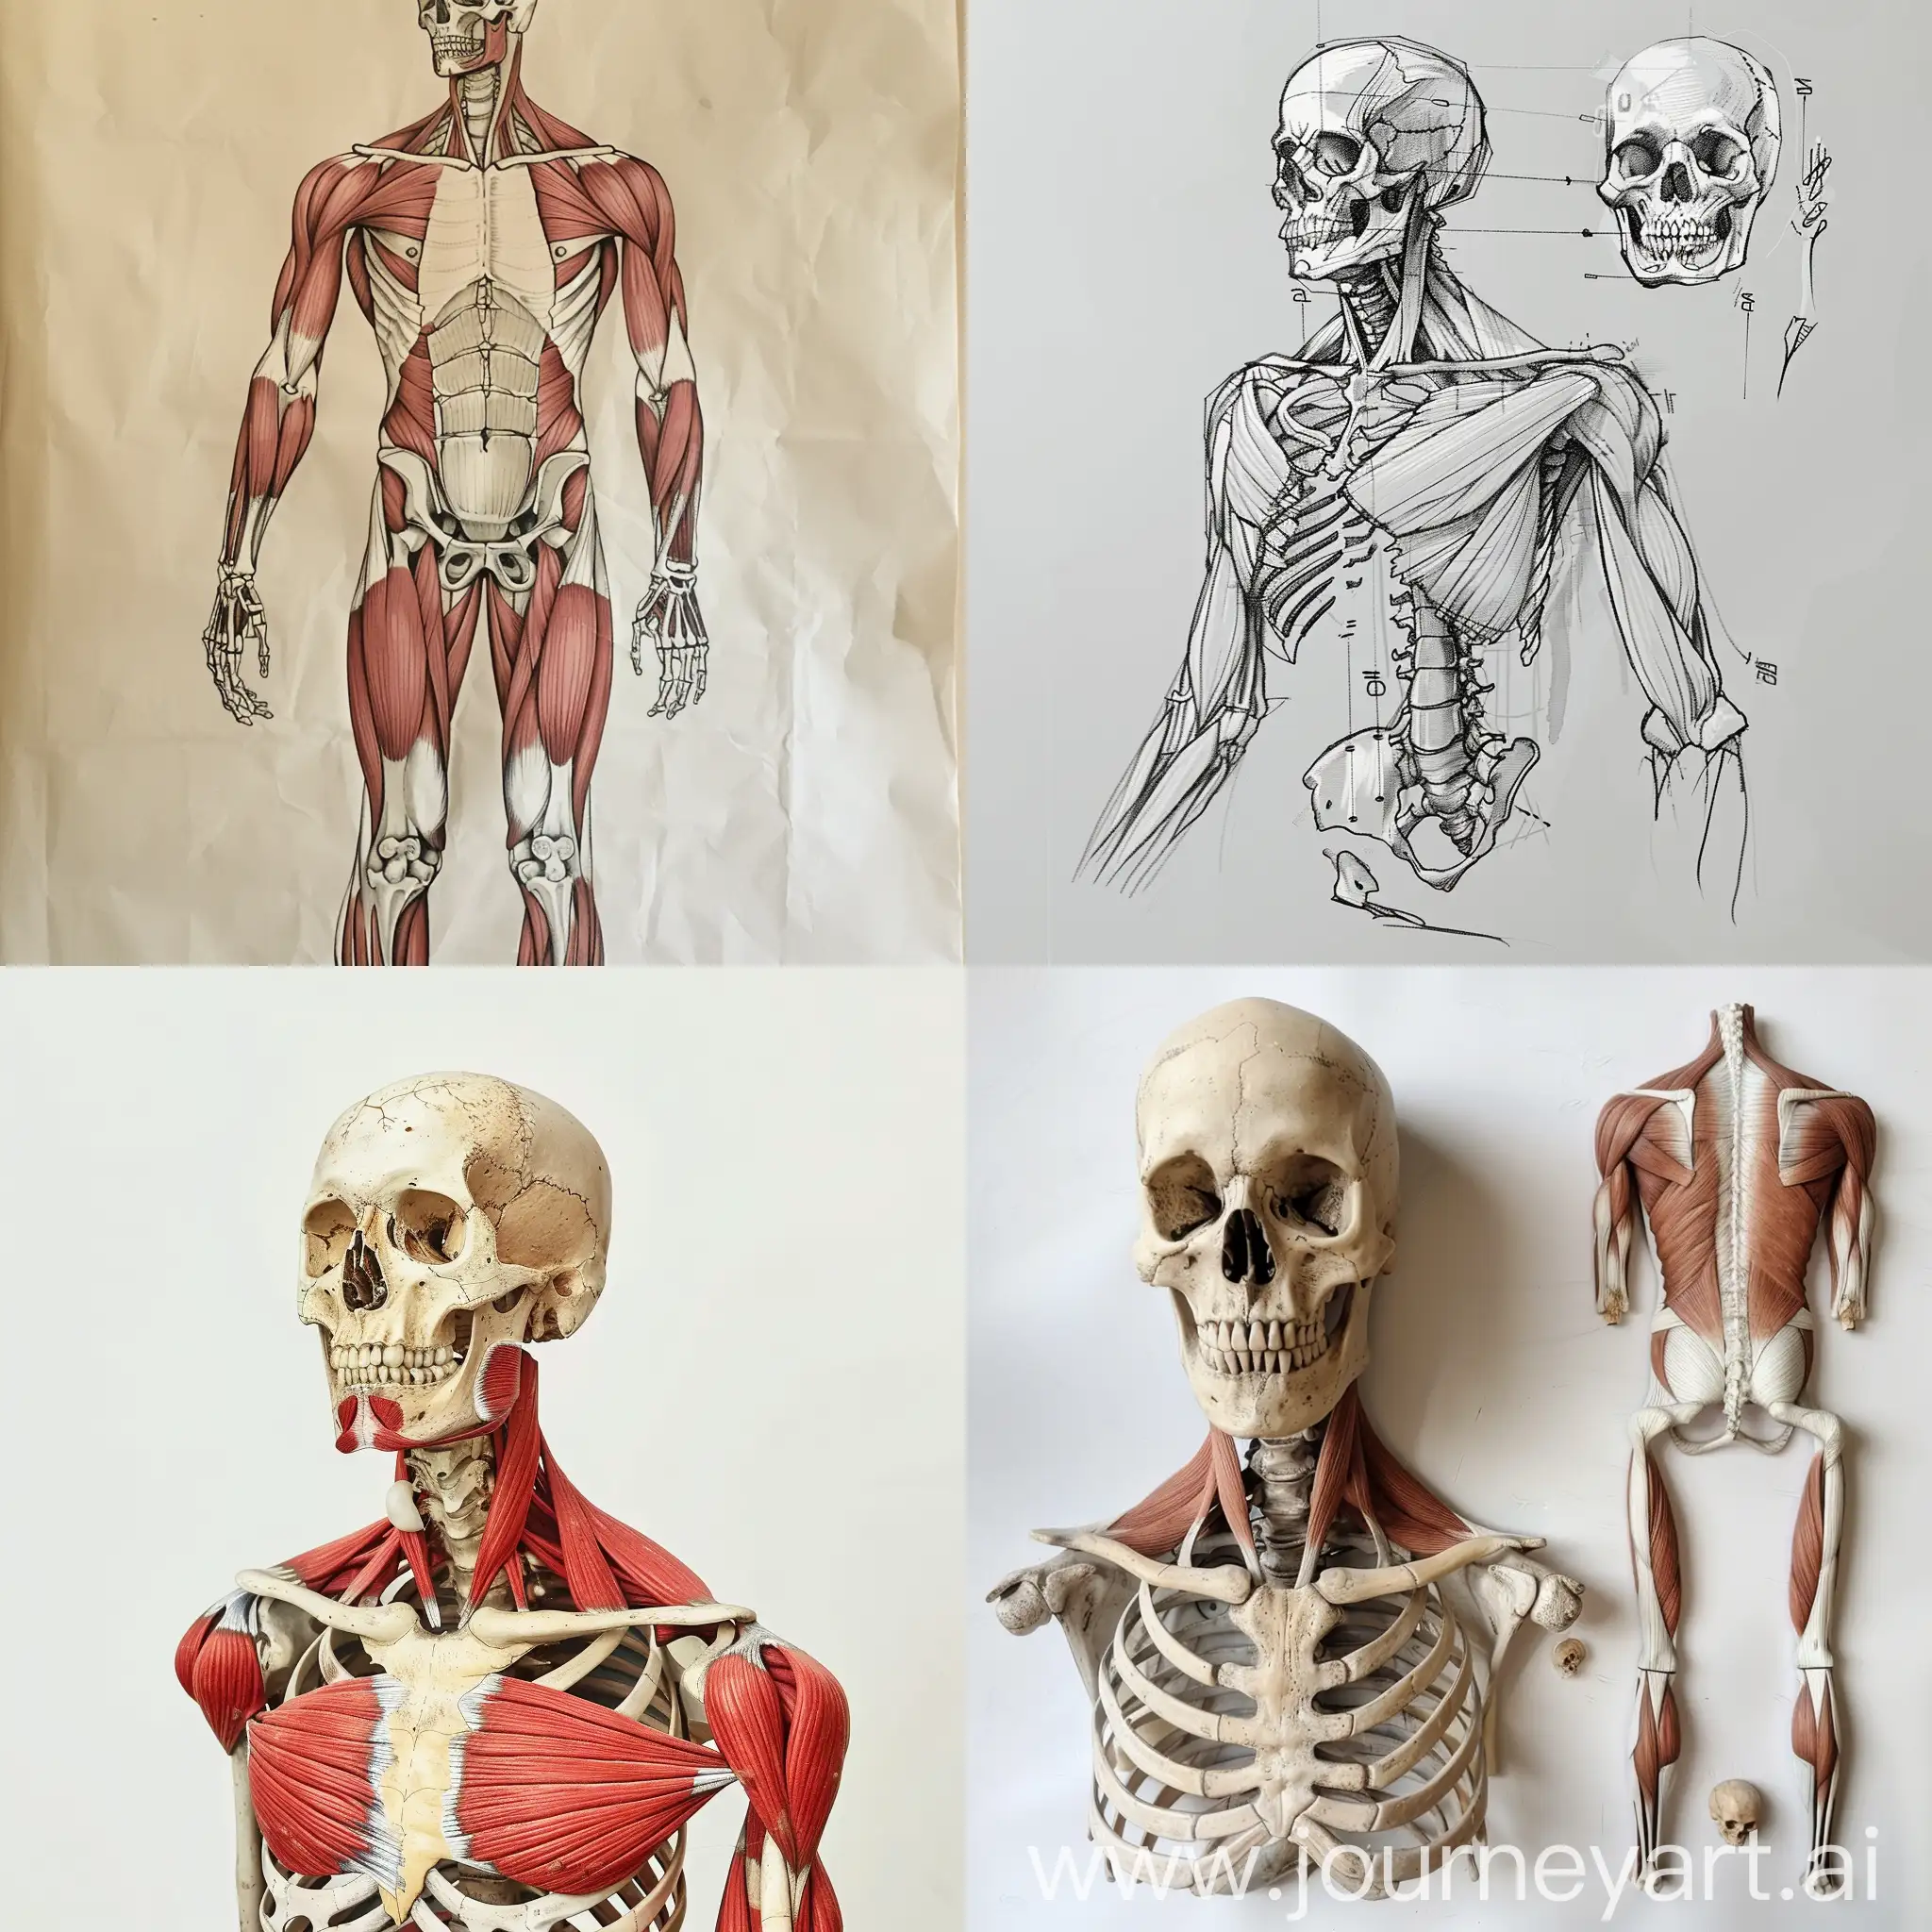 Educational-Anatomy-Skeleton-and-Muscles-in-School-Setting